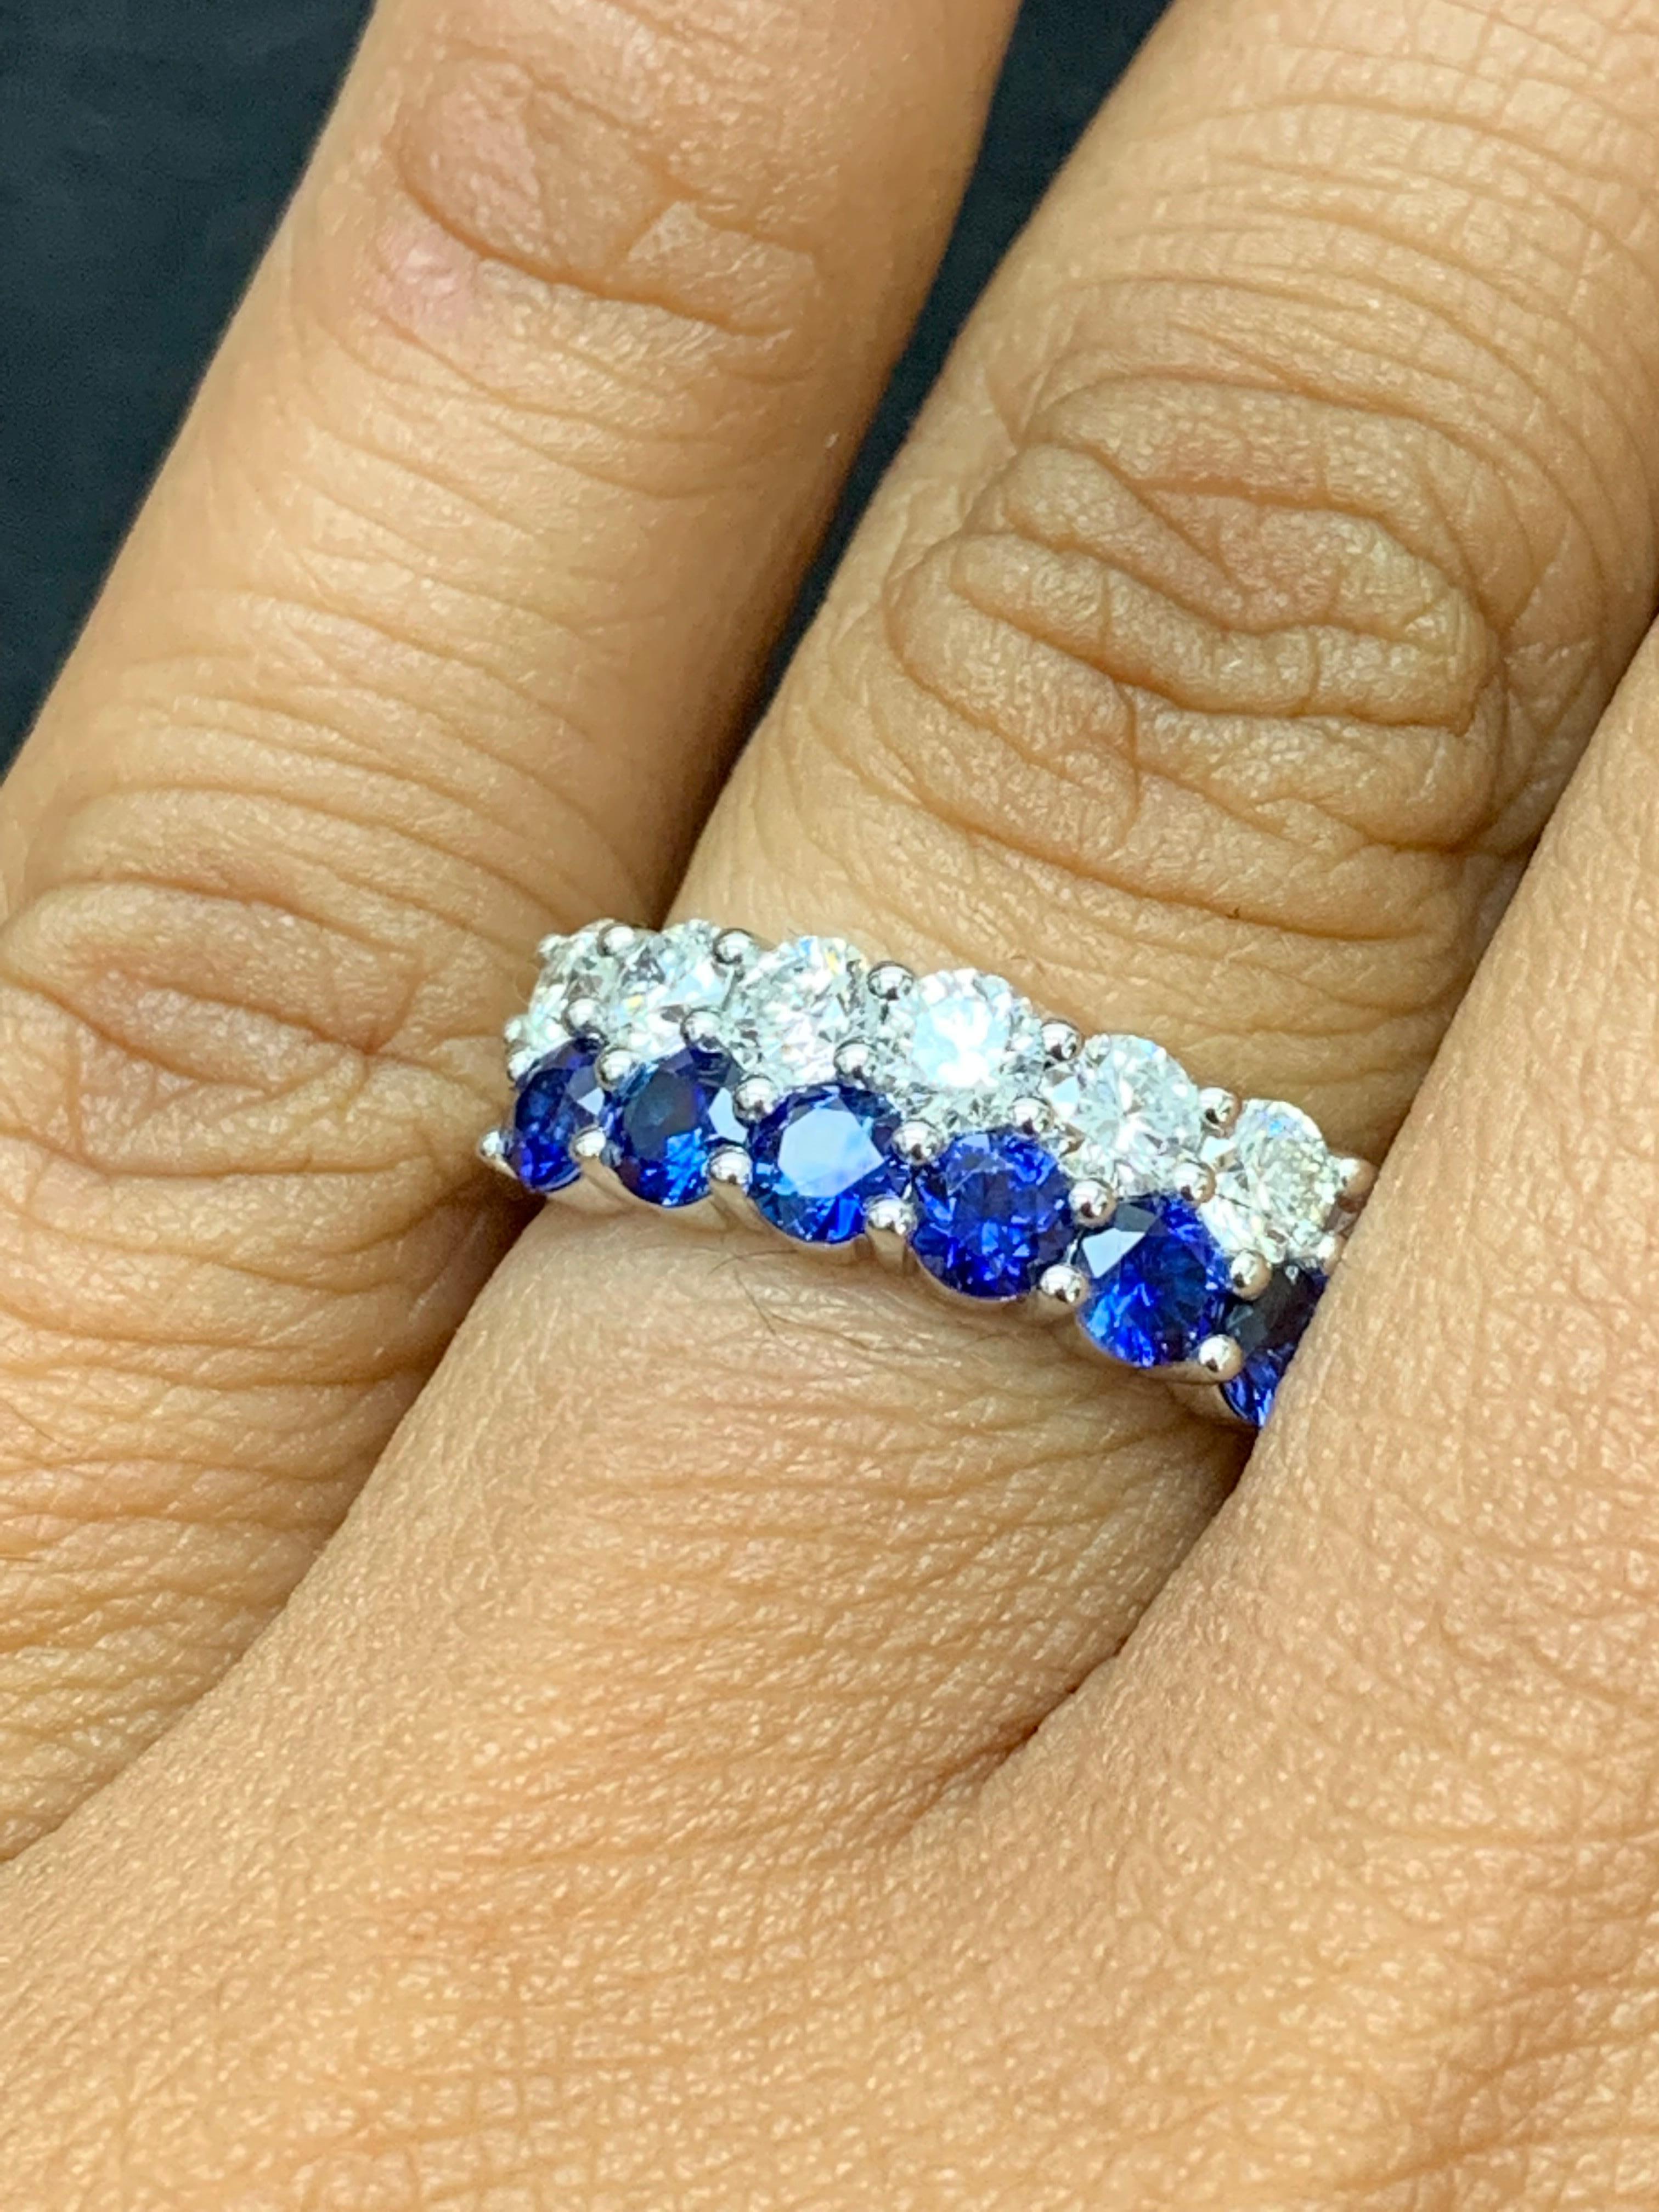 A unique and fashionable ring showcasing two rows of round-shape 9 blue sapphires and 10 diamonds, set in a band design. Blue Sapphires weigh 1.50 carats and Diamonds weigh 1.49 carats total. A brilliant and masterfully-made piece.

Style available